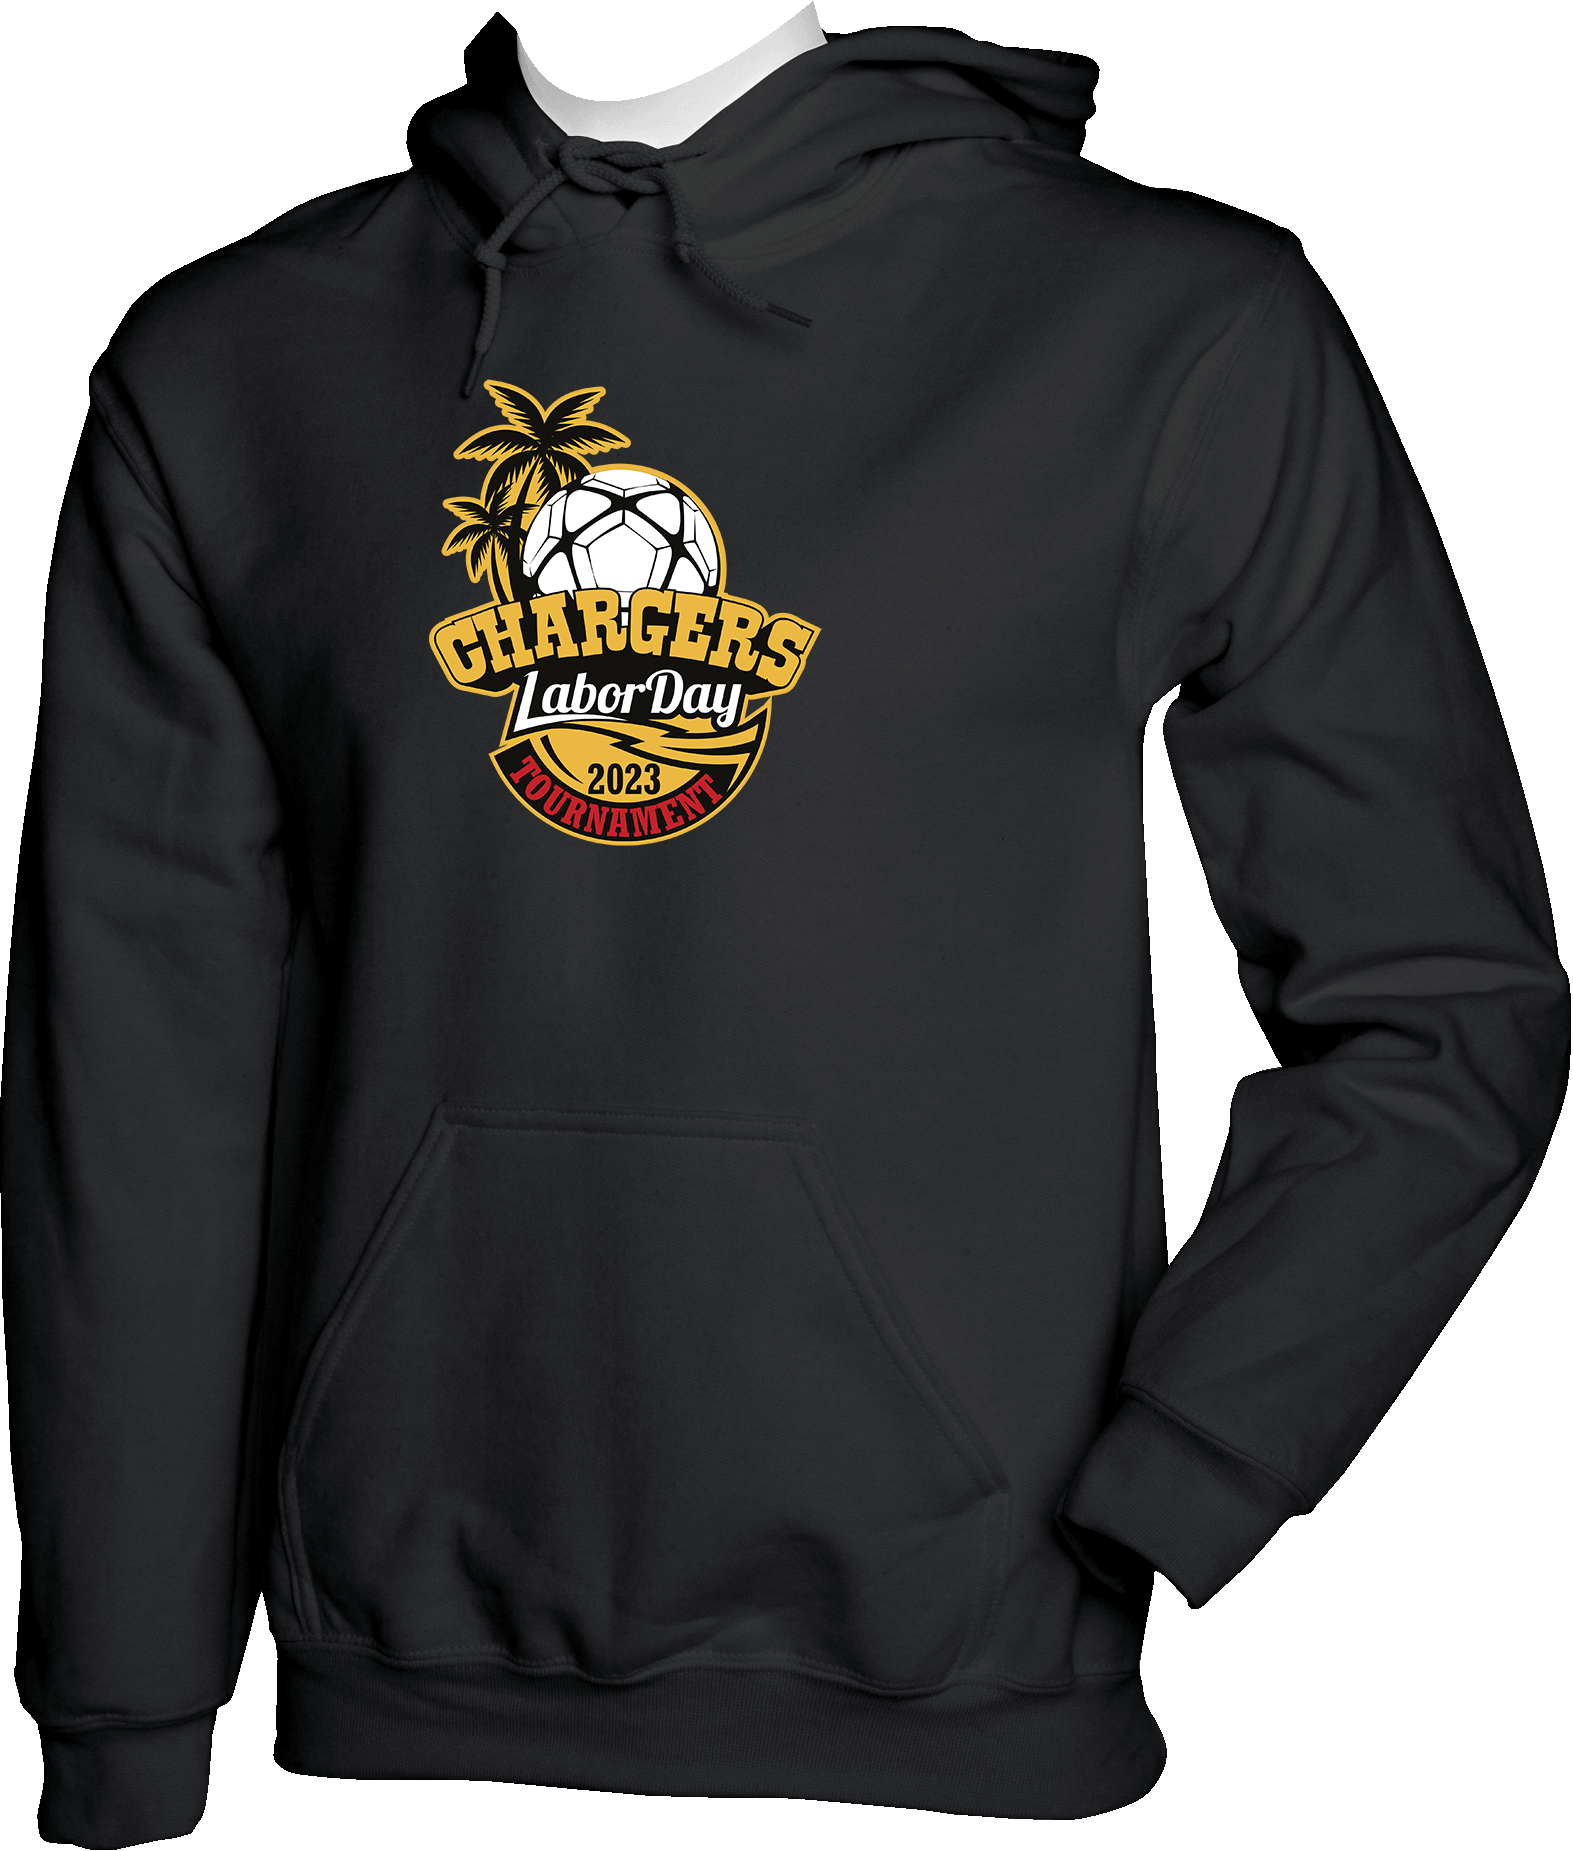 Hoodies - 2023 Chargers Labor Day Tournament